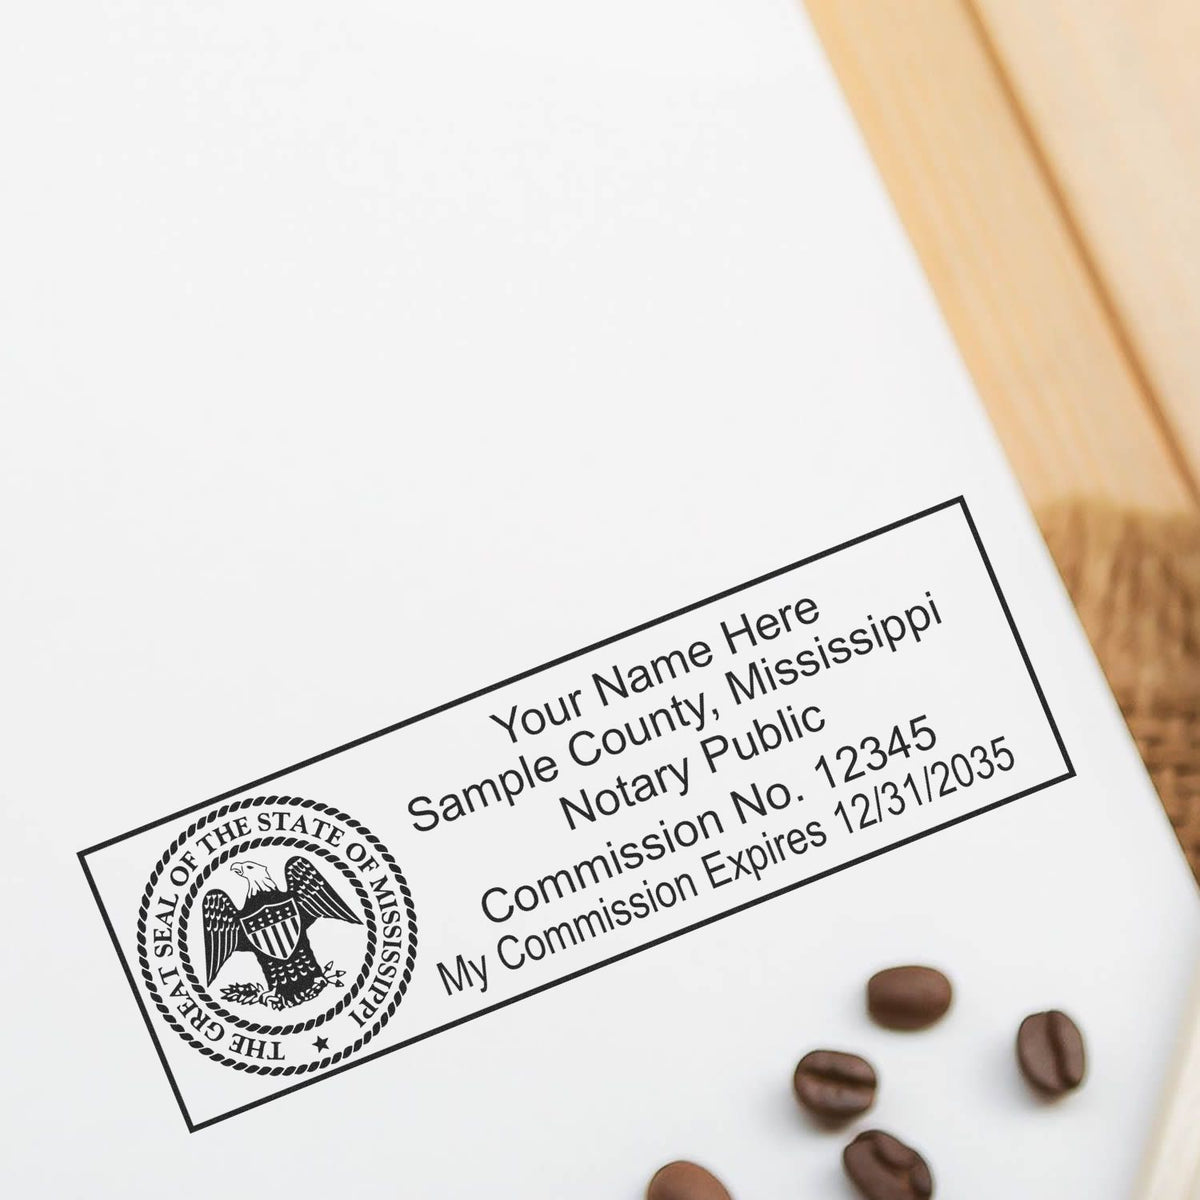 A lifestyle photo showing a stamped image of the Heavy-Duty Mississippi Rectangular Notary Stamp on a piece of paper